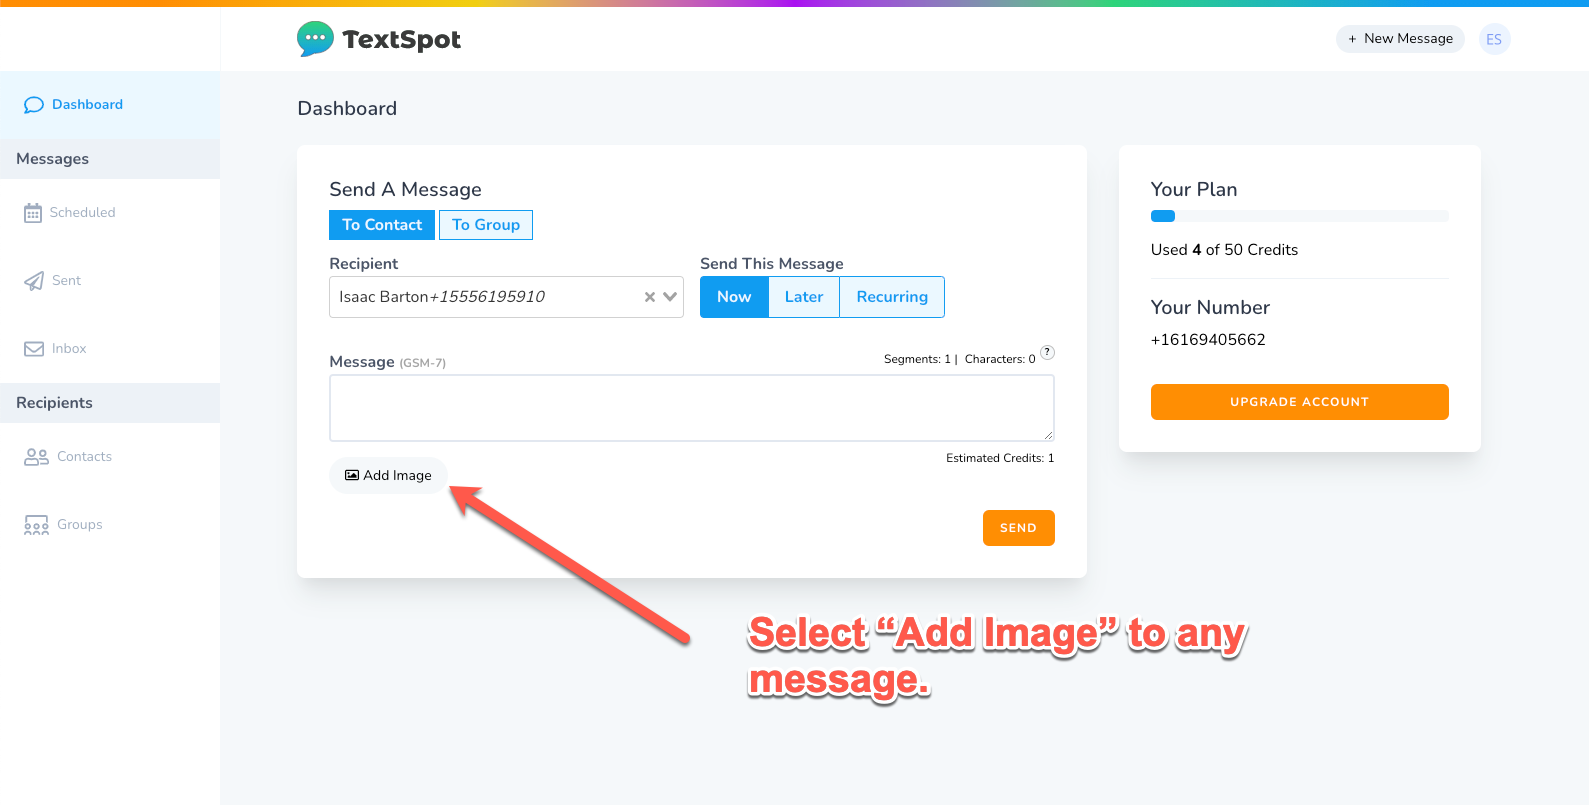 add image to any text message in TextSpot